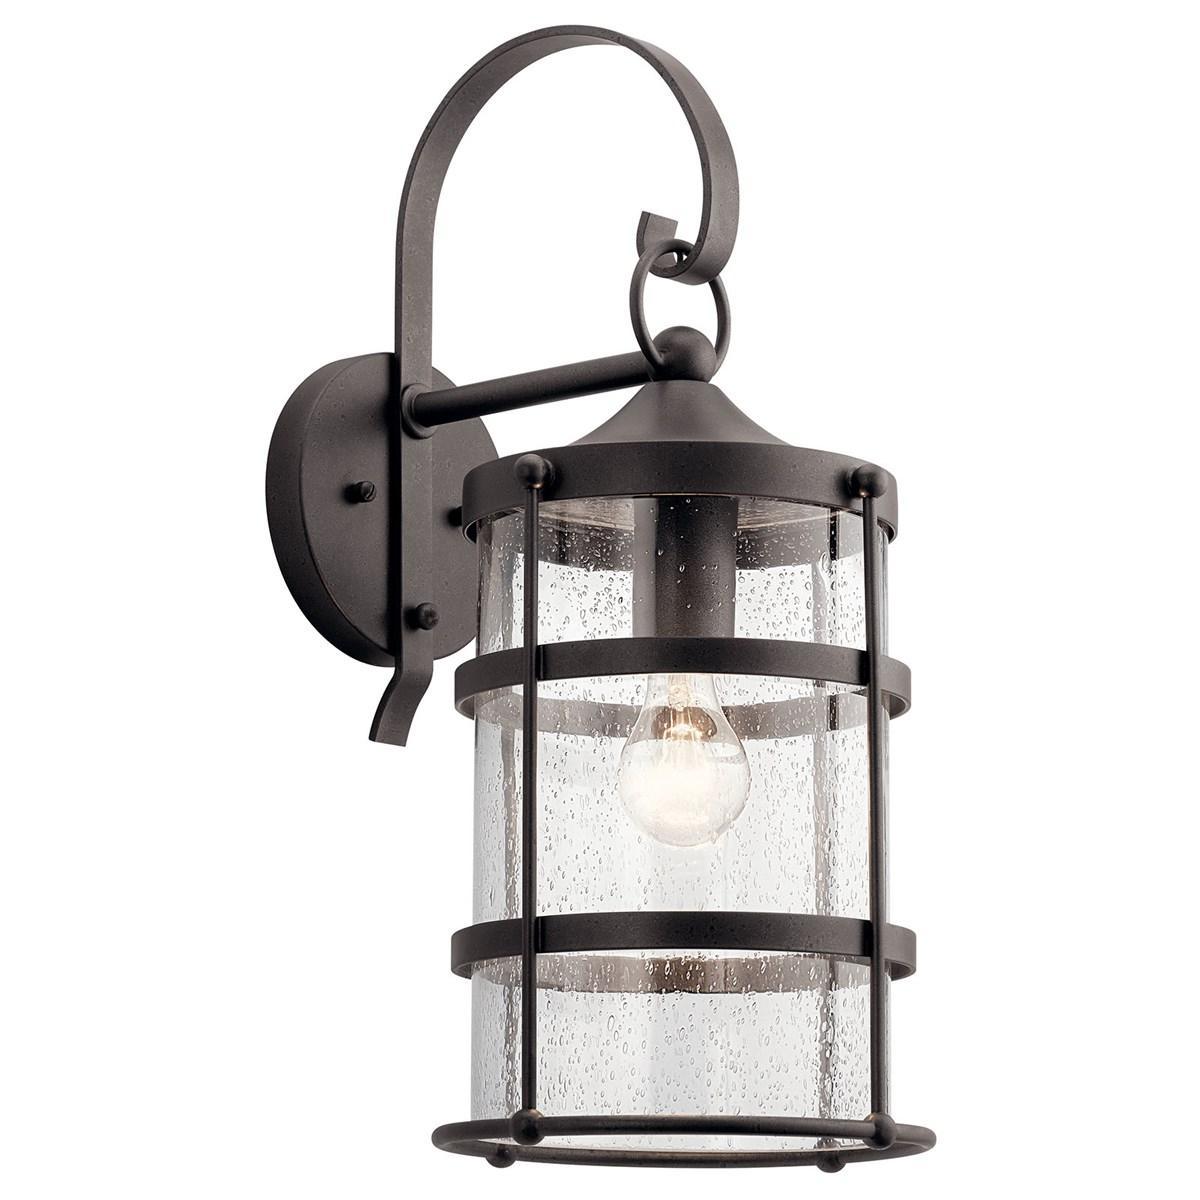 Mill Lane 21 in. Outdoor Wall Light Anvil Iron Finish